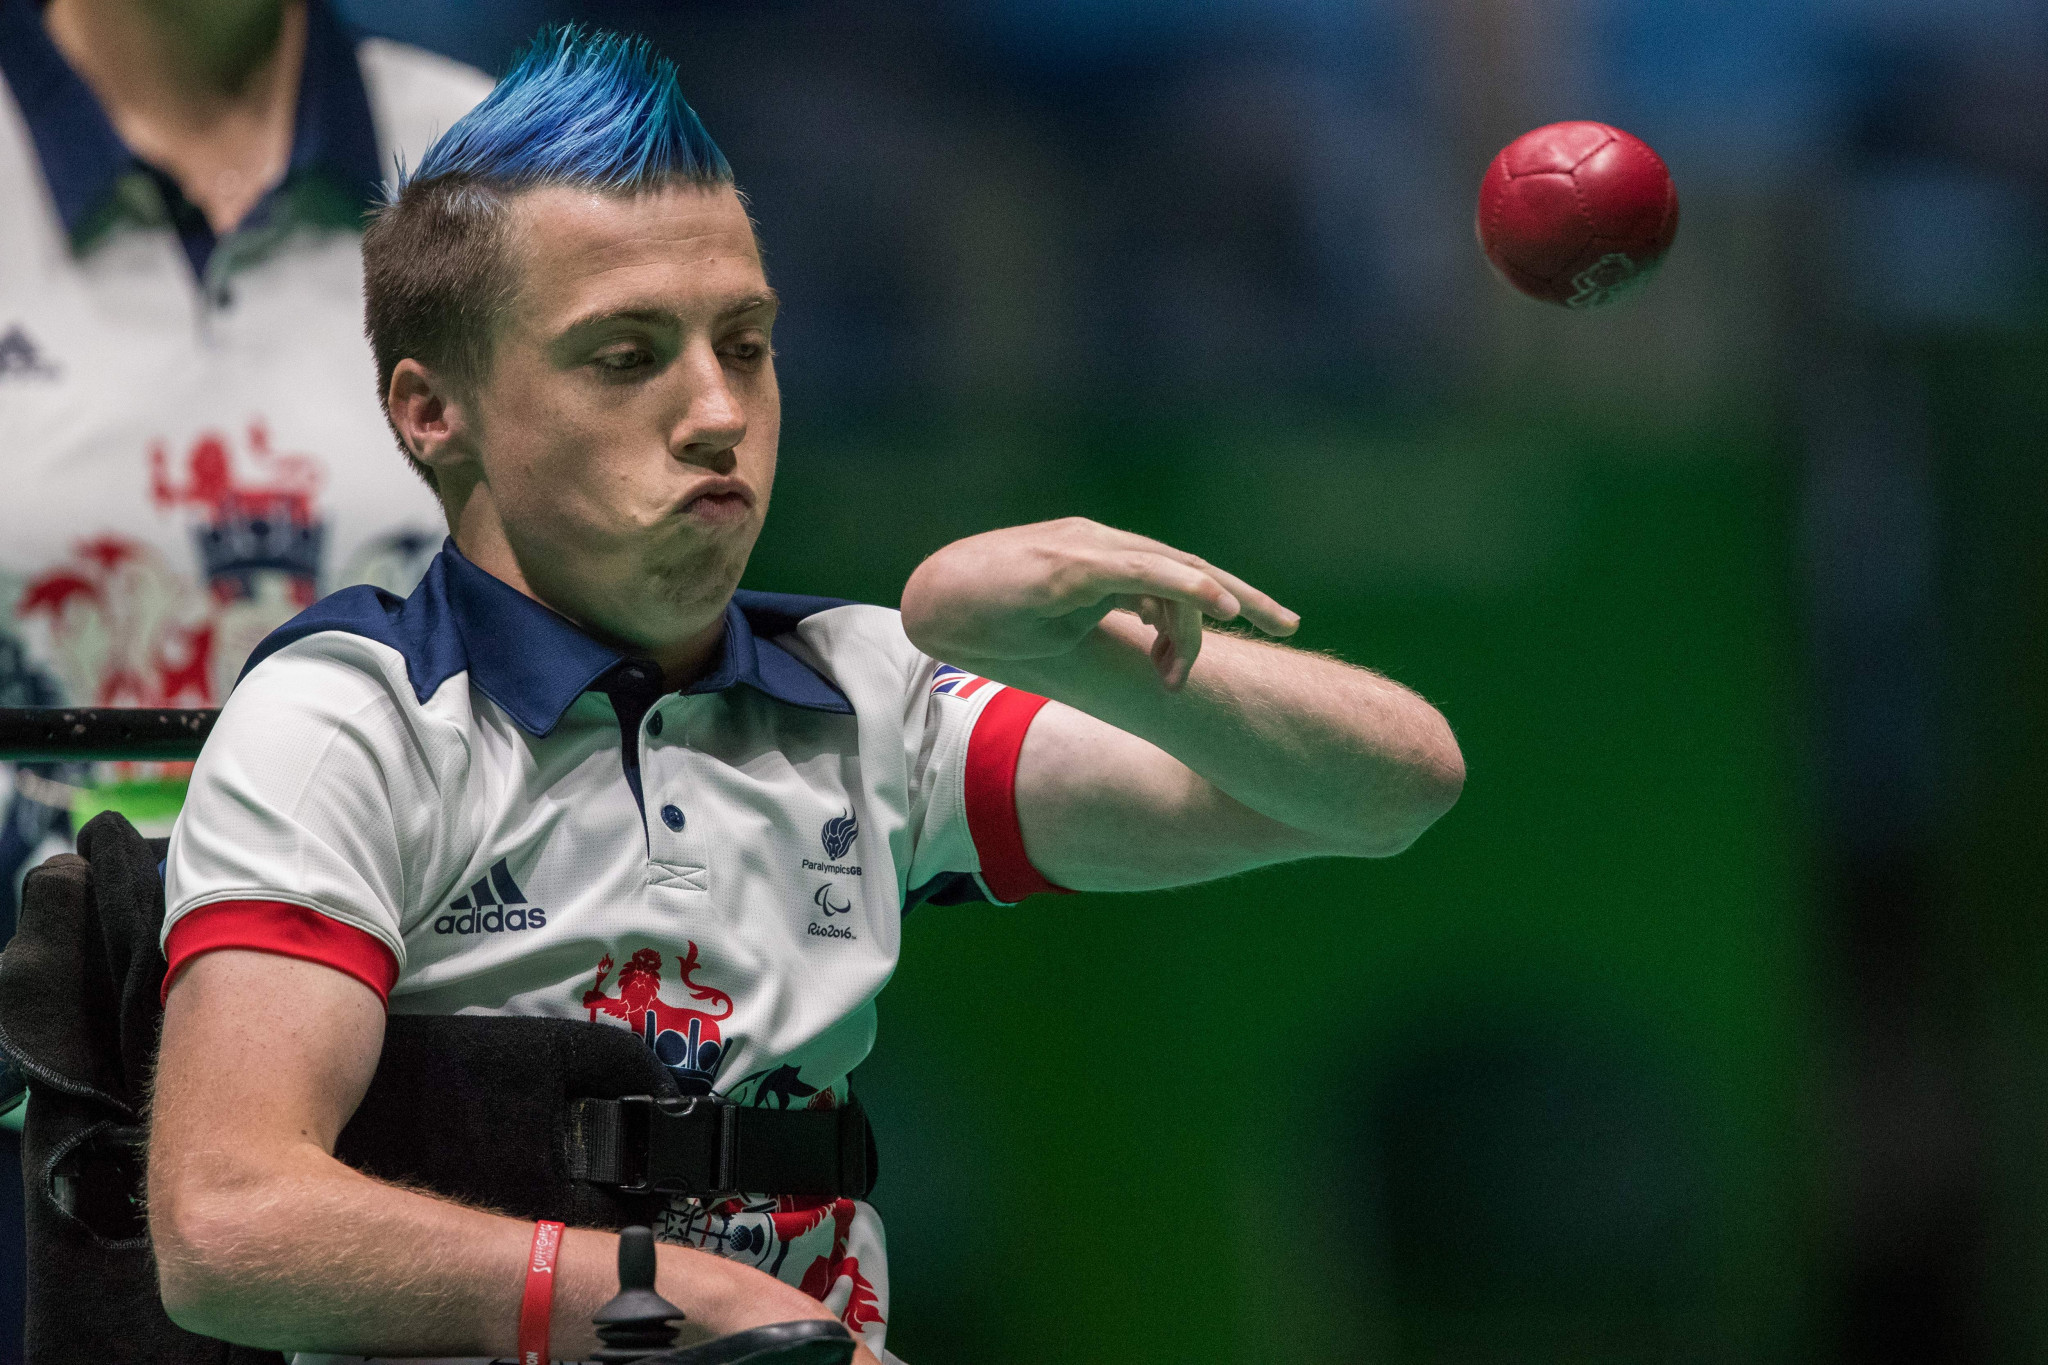 All four individual champions set to compete at Hong Kong Boccia World Open